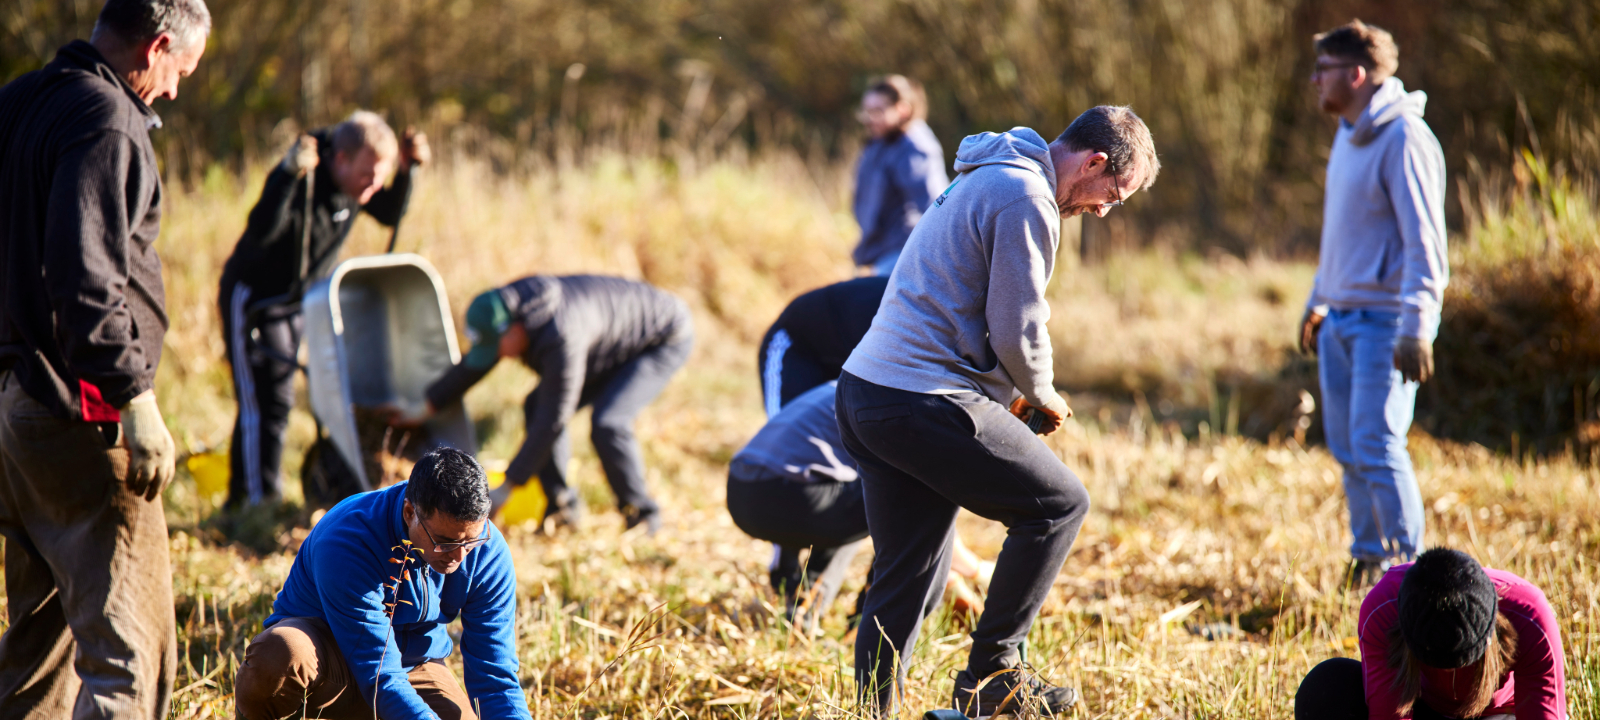 Corporate group taking part in tre planting event